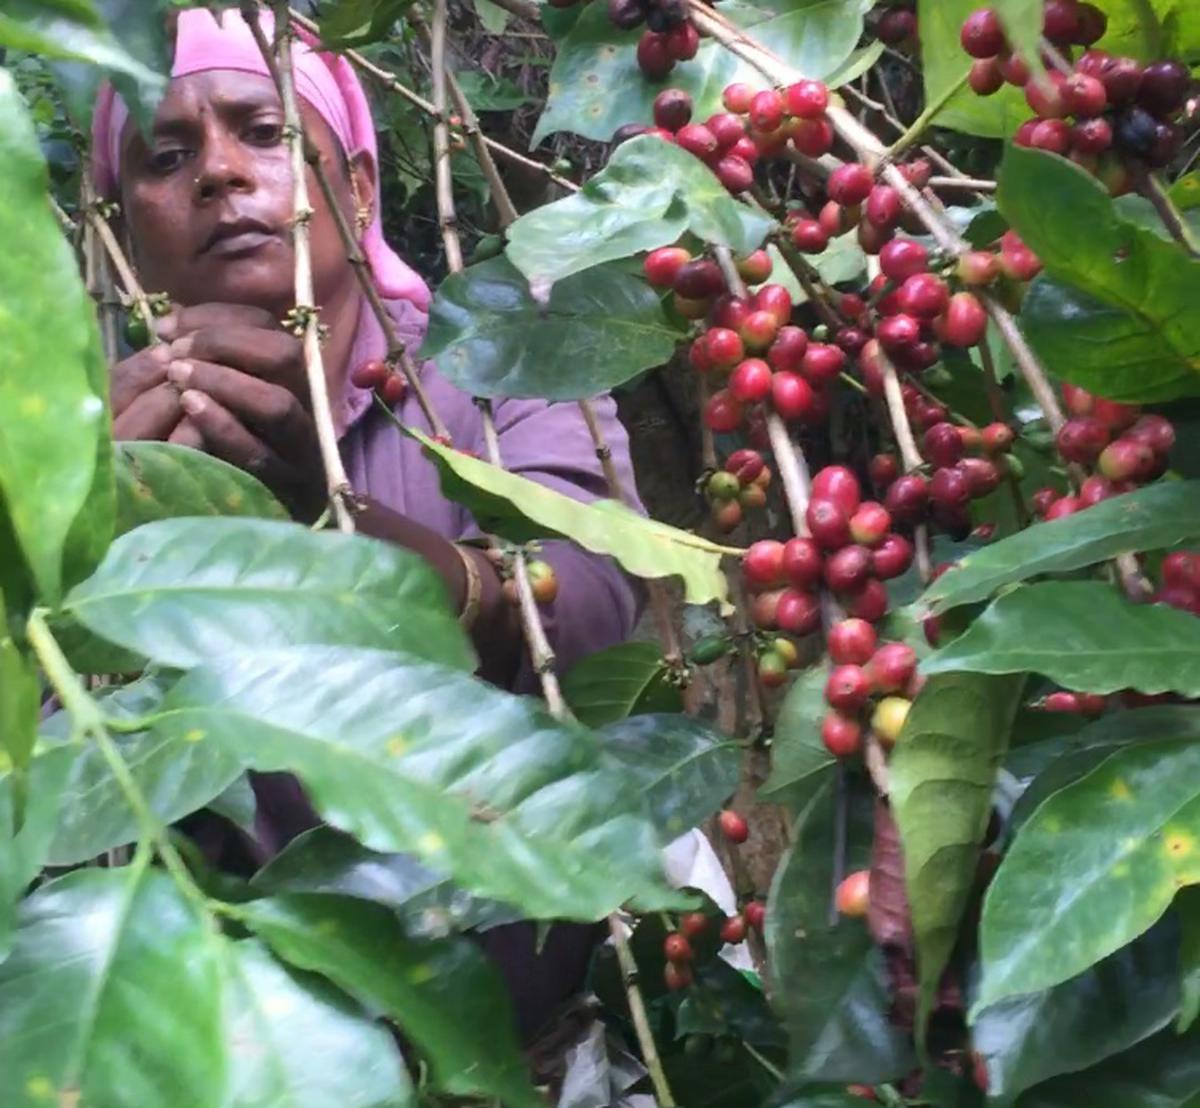 A worker hand-picking coffee at The Natural Farmer